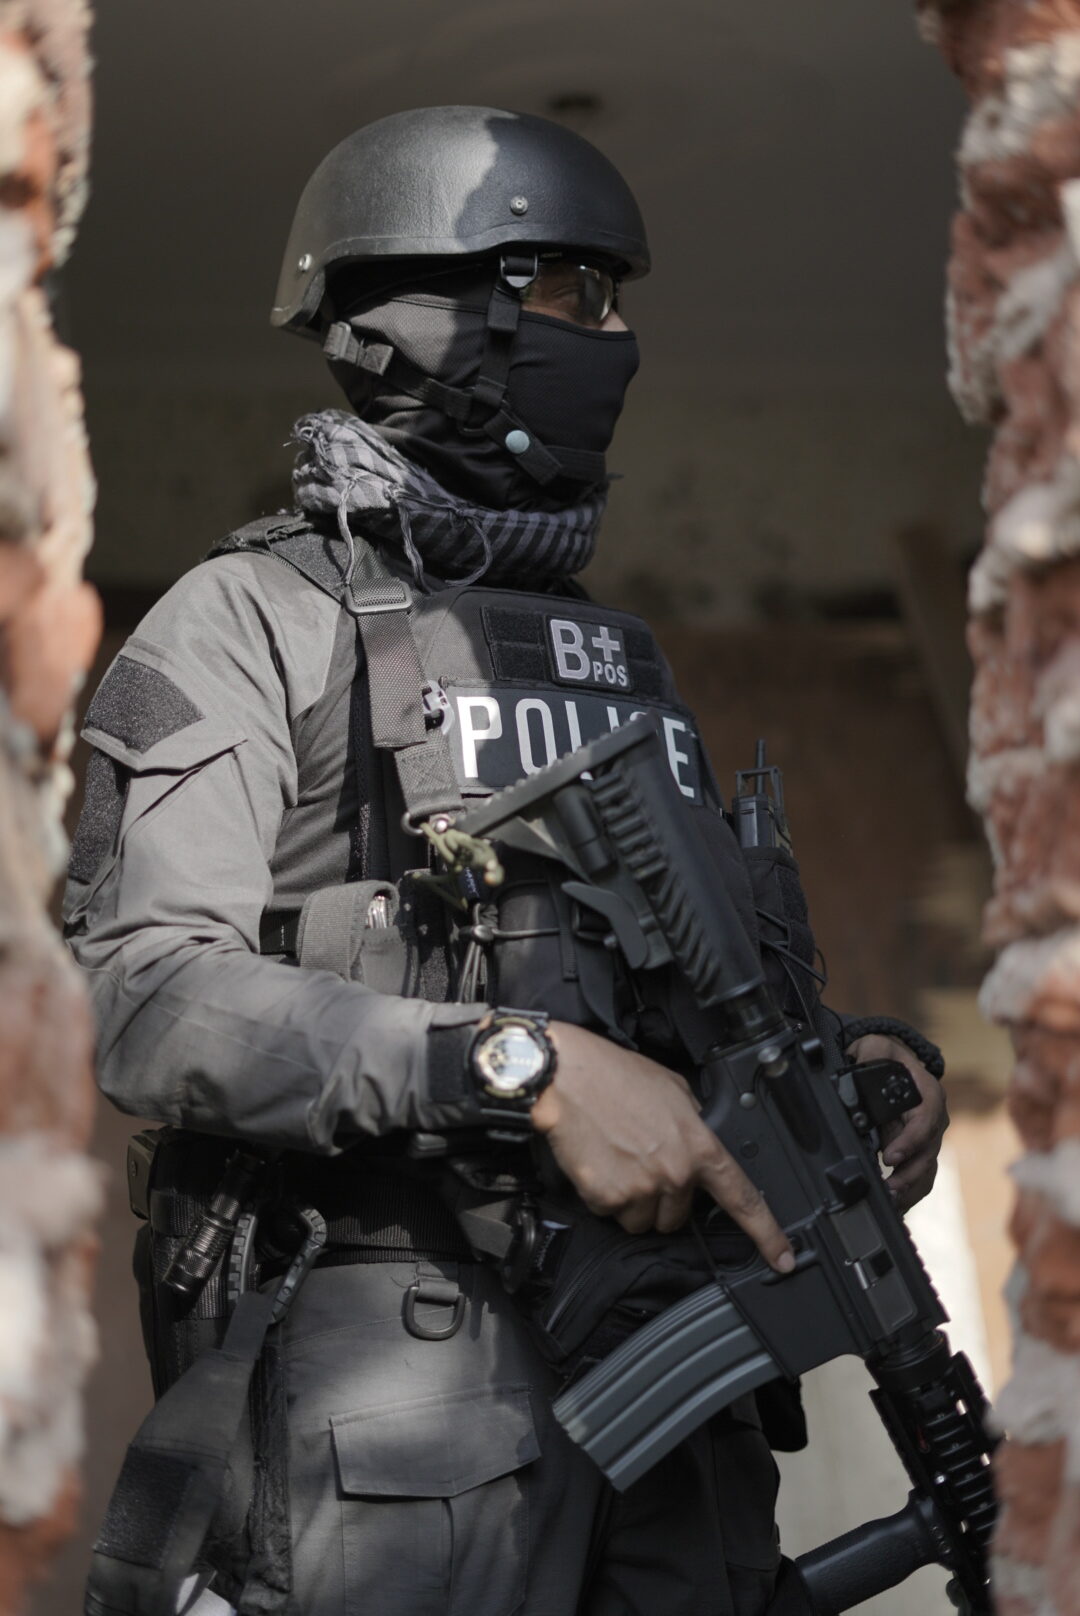 Armasen Tactical - High Quality Tactical Gear - Proudly Made in India.